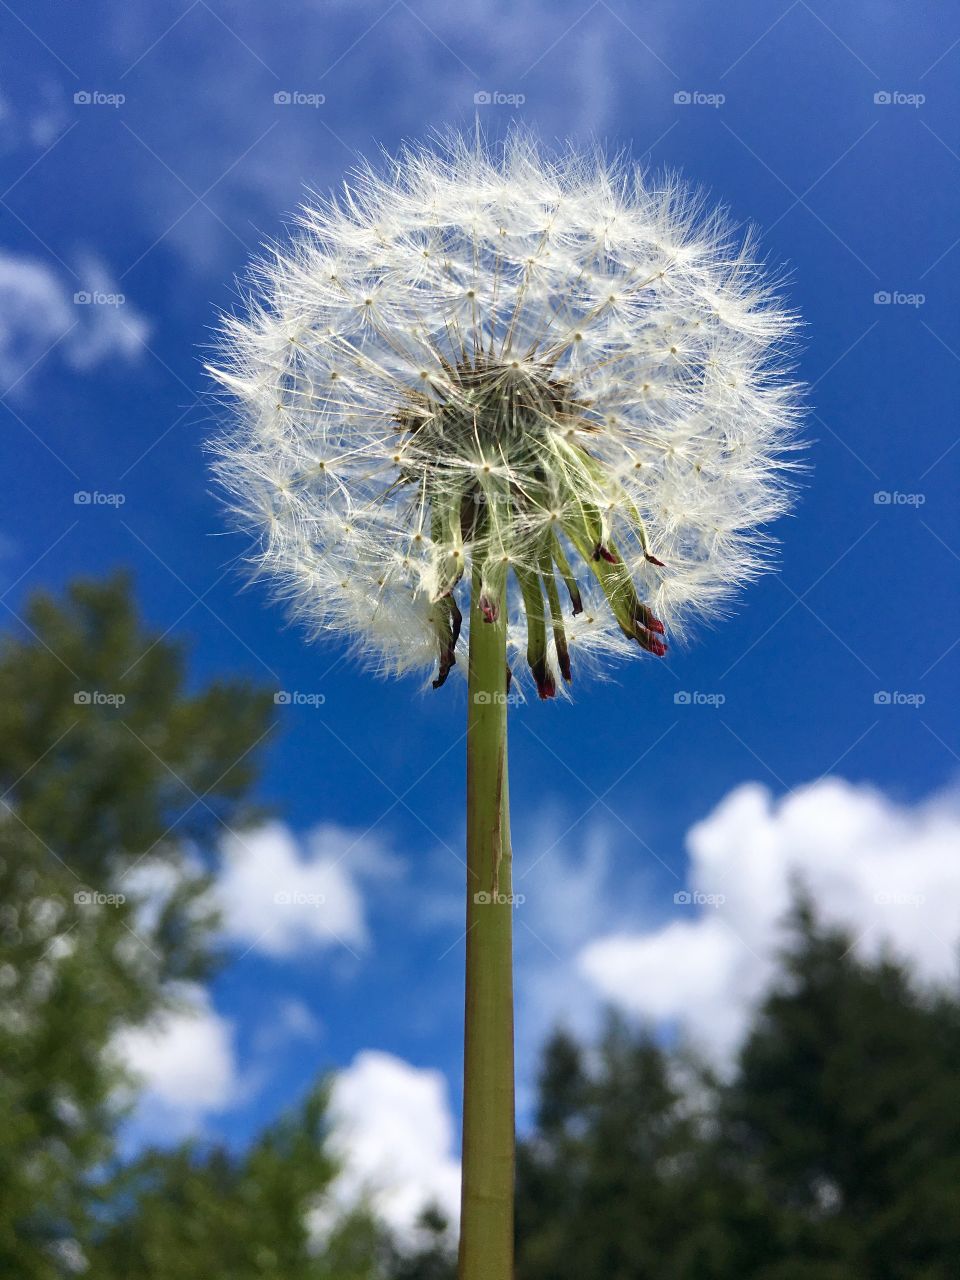 Dandelion against blue sky with white clouds 